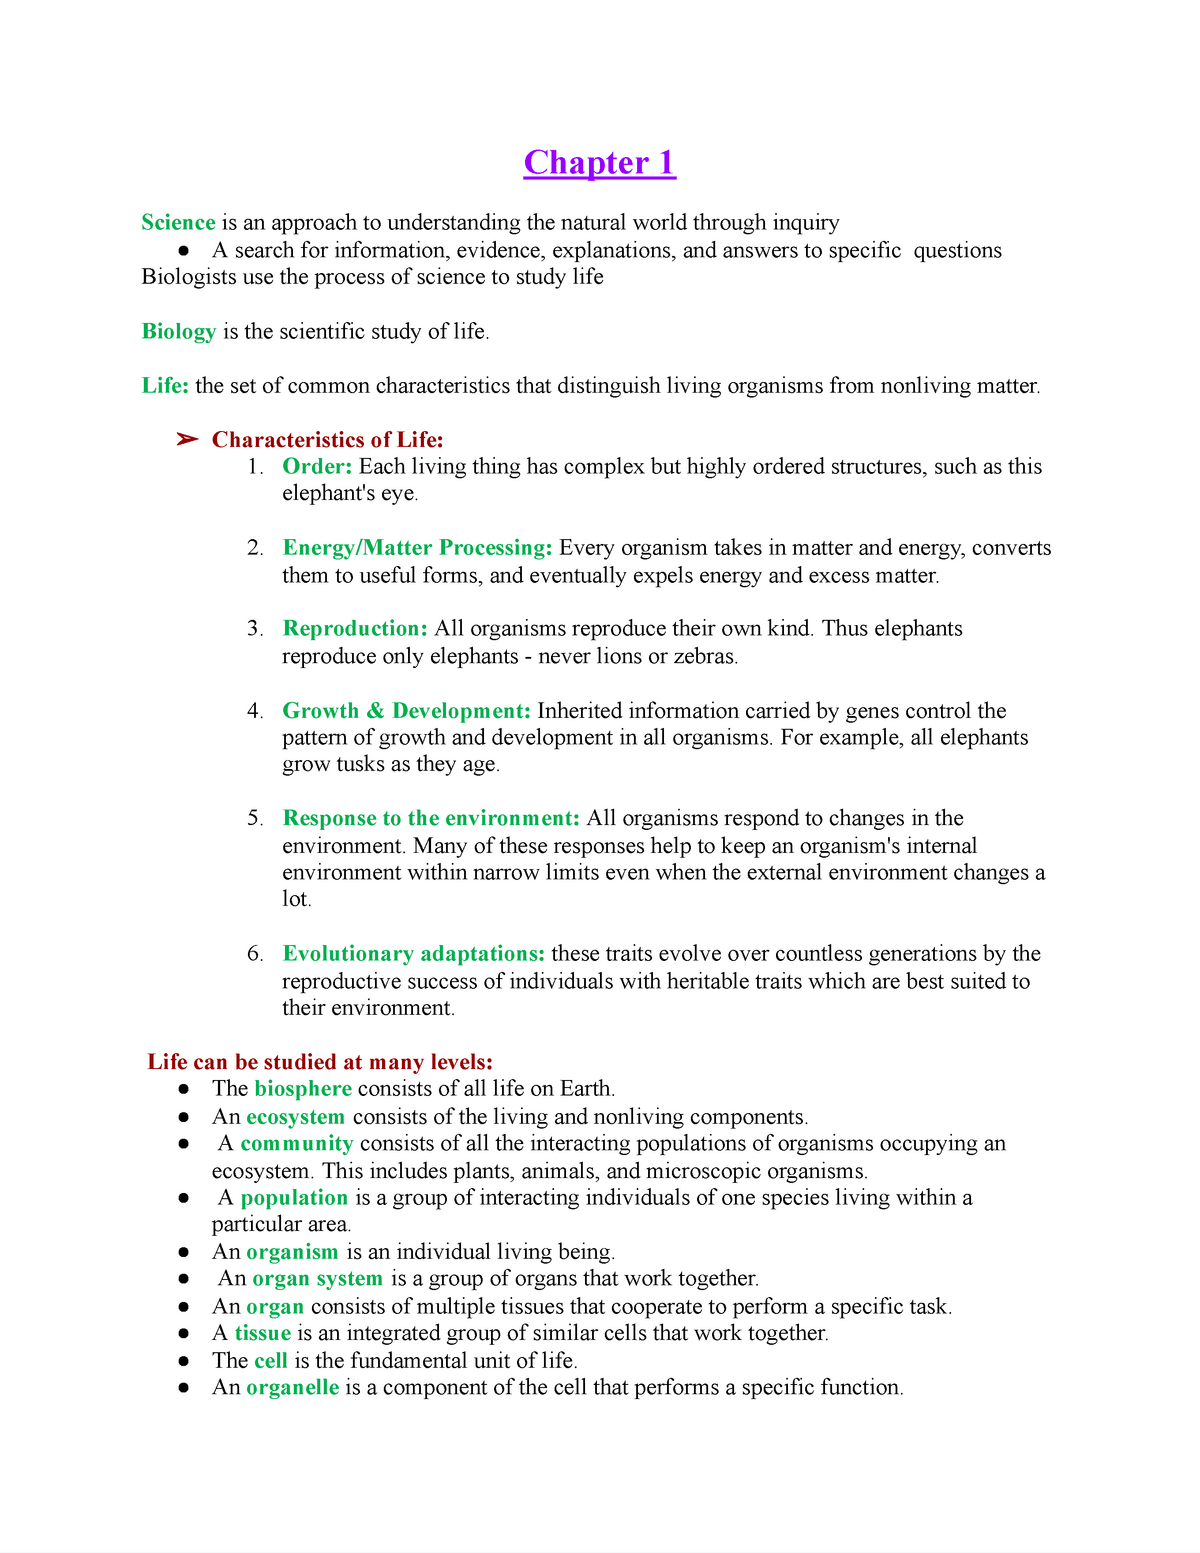 BIO Notes Chapter 1 - 6 - Google Docs - Chapter 1 Science is an ...